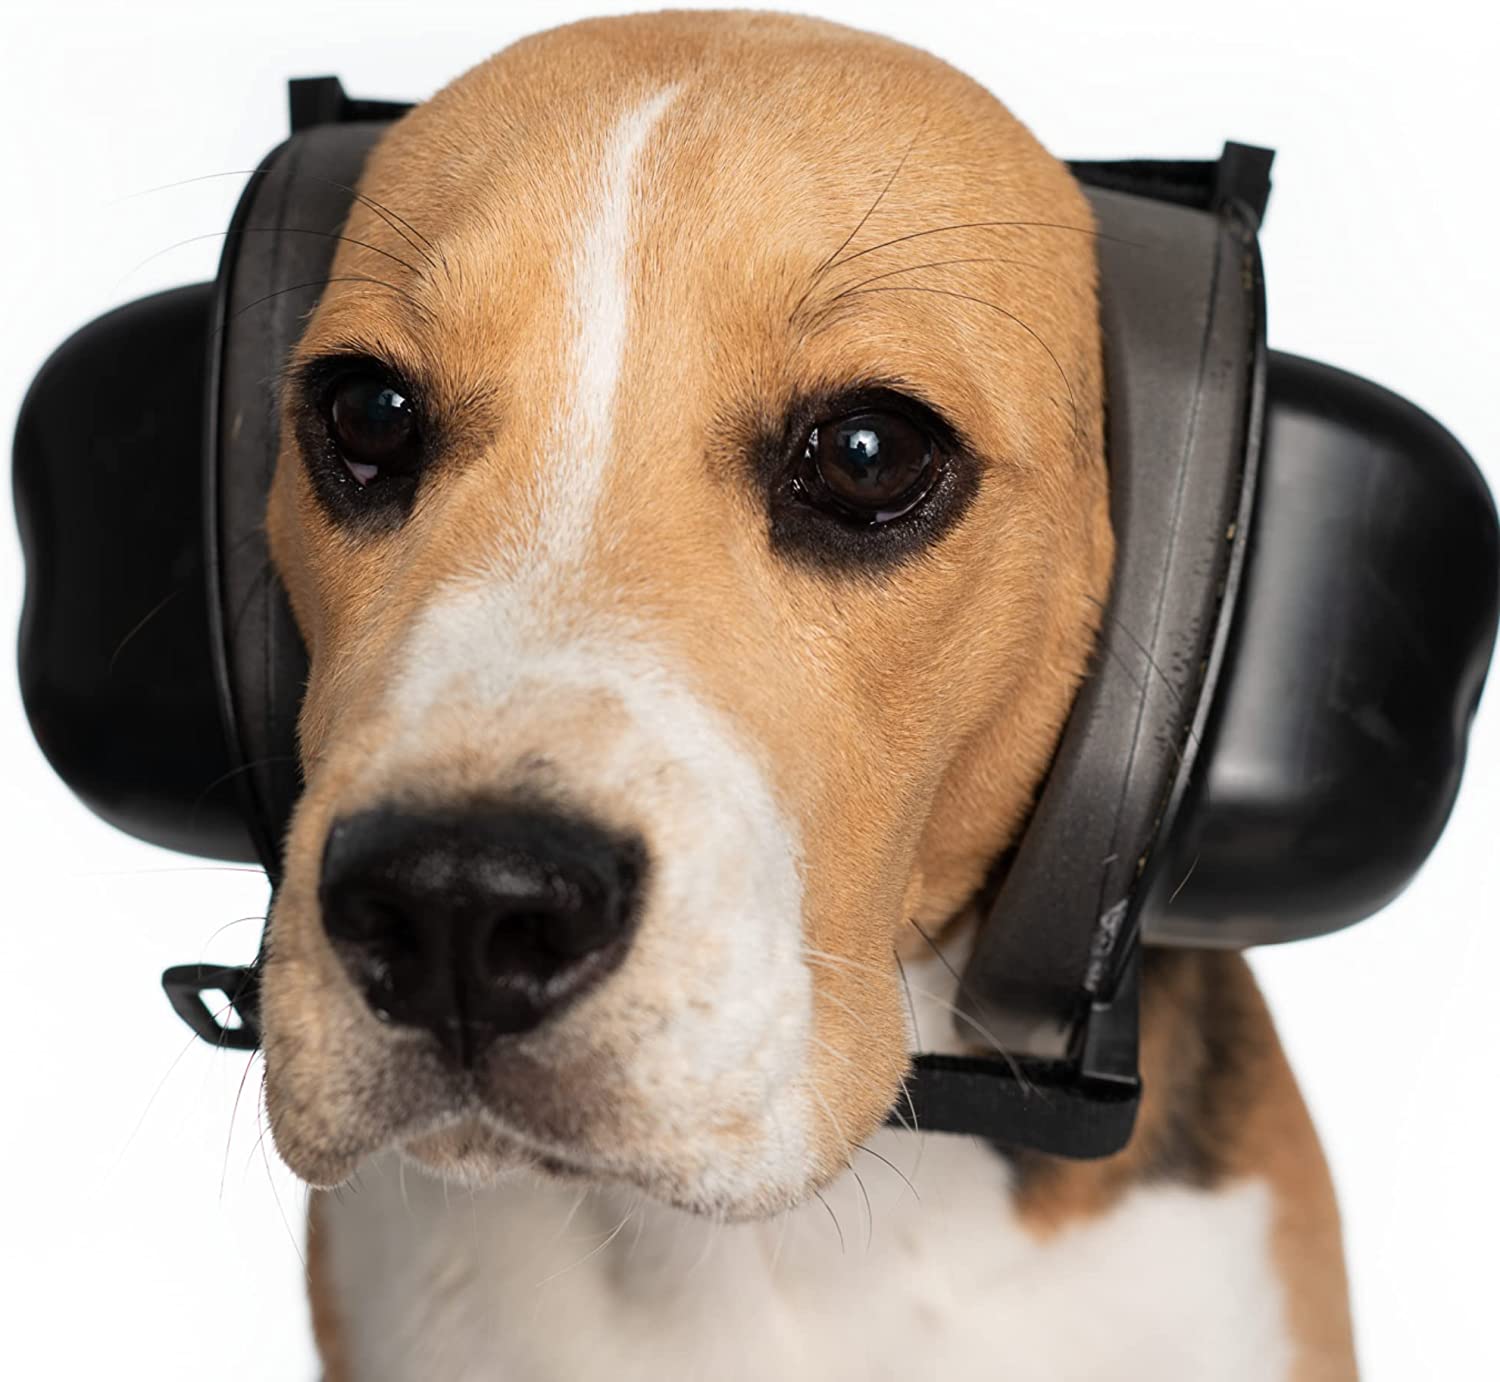 Anti Anxiety Dog Ear Protection - Reduce Noise by 32dB NRR, Safe Dogs Ears Noise Cancelling Dog Headphones for Calming